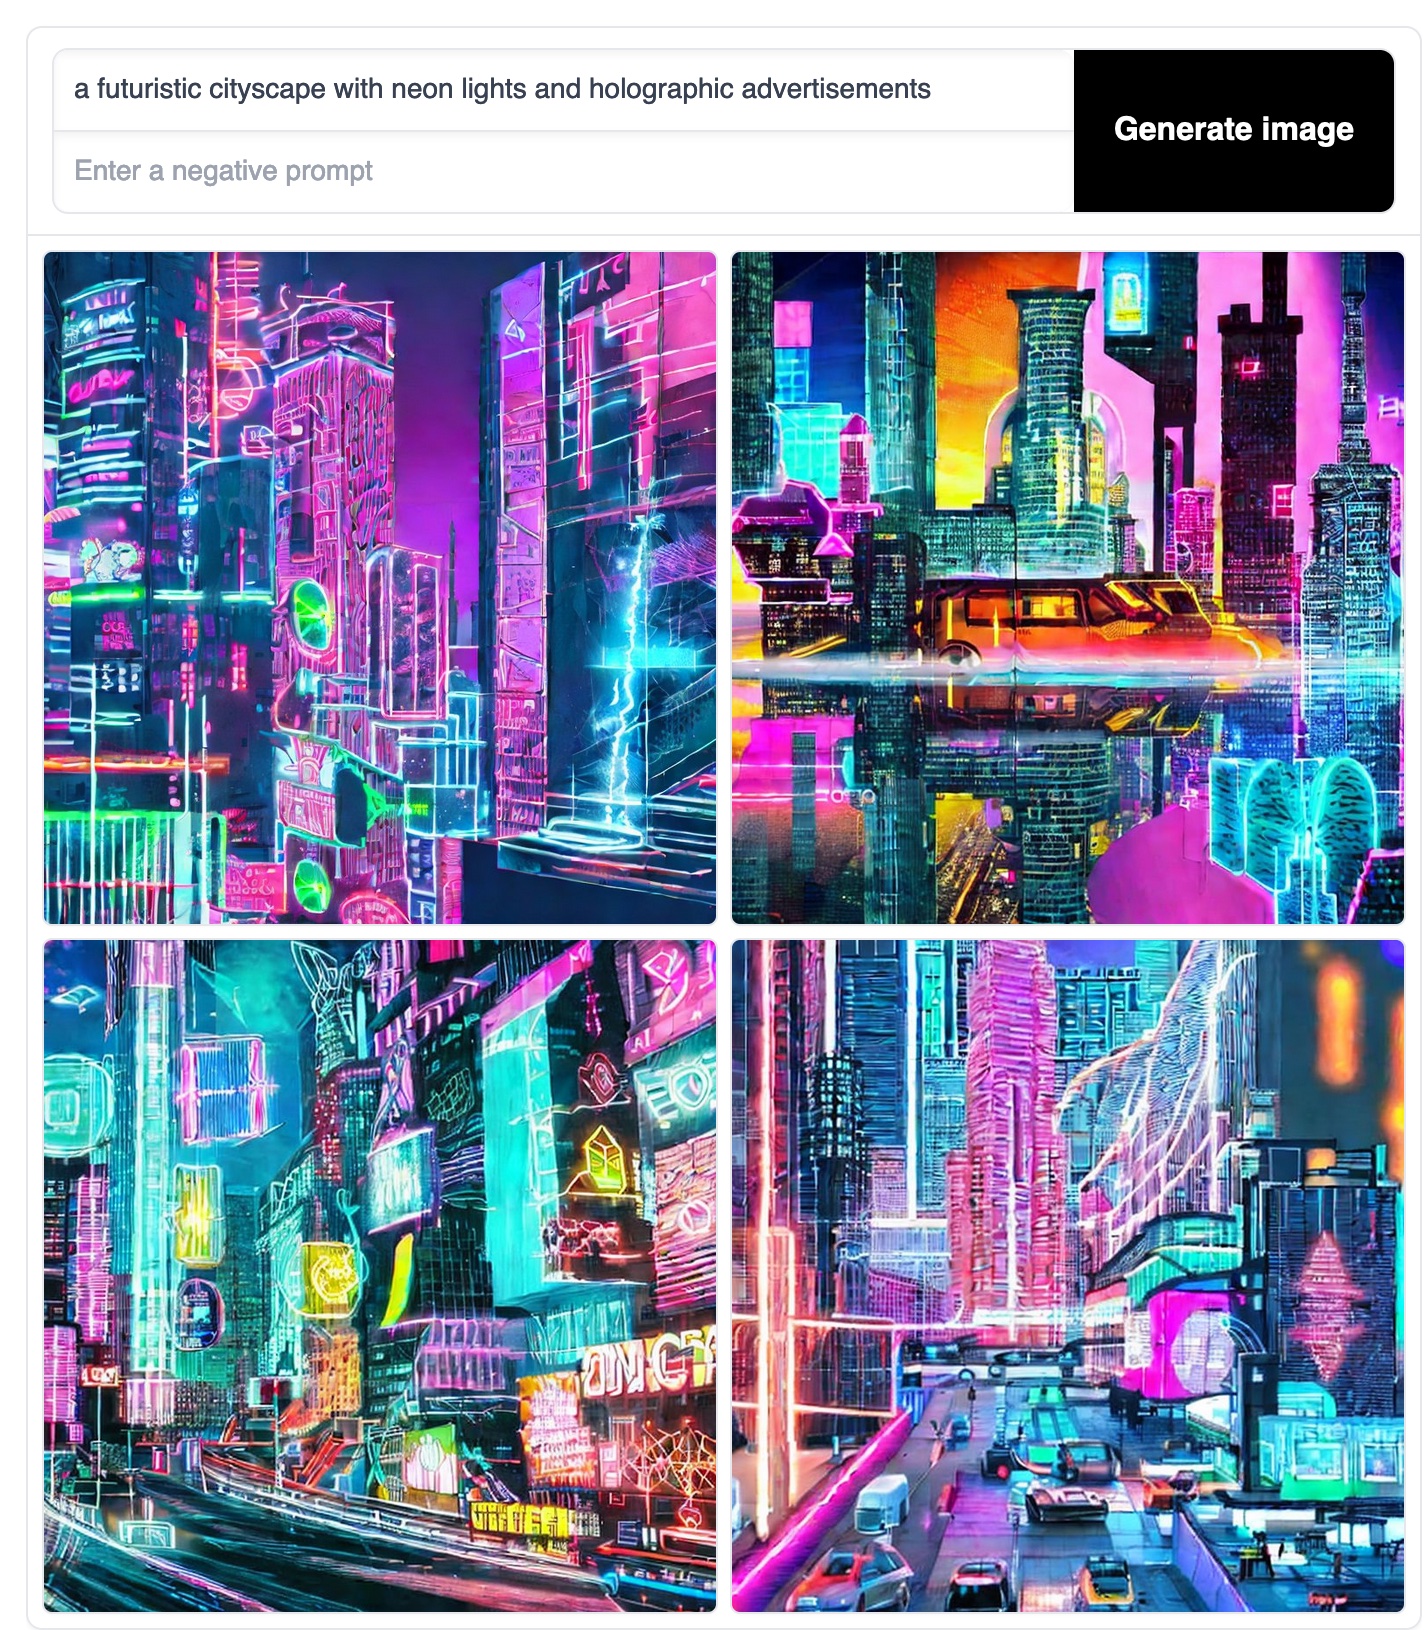 a futuristic cityscape with neon lights and holographic advertisements